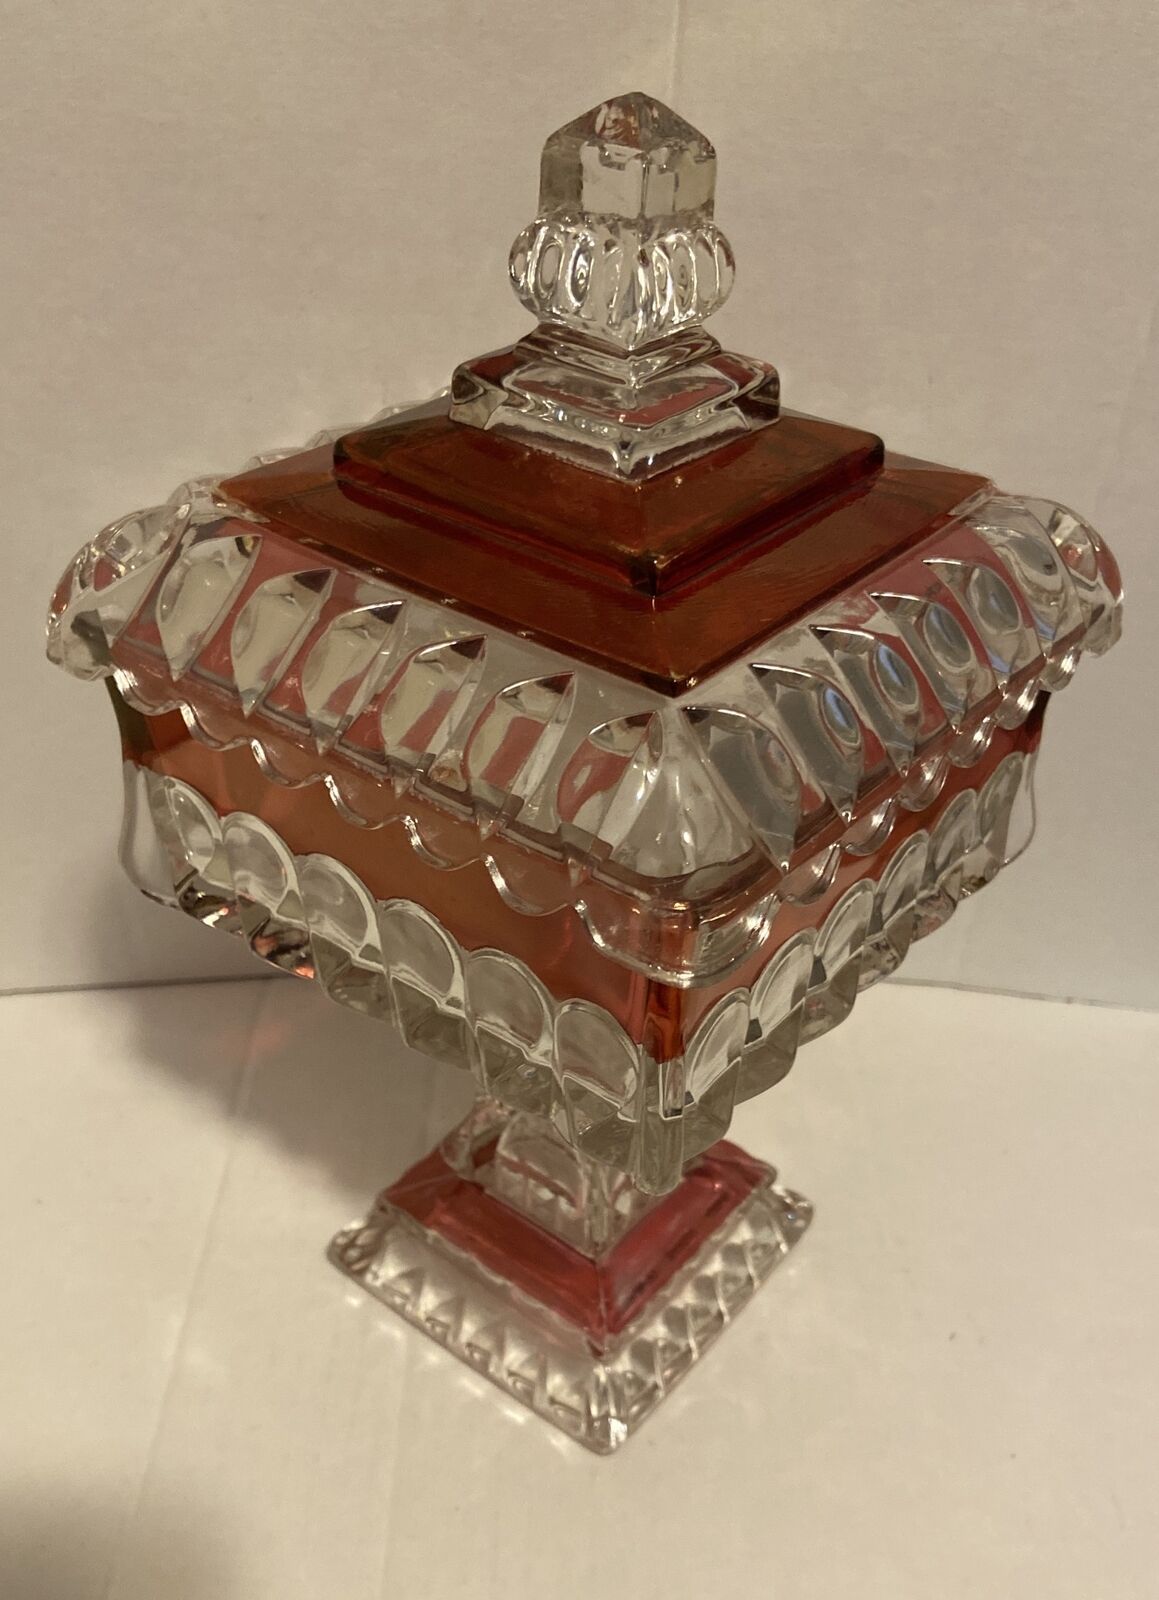 Westmoreland Glass Wedding Box Bowl Pedestal Candy Compote & Lid Ruby Vtg 50’s